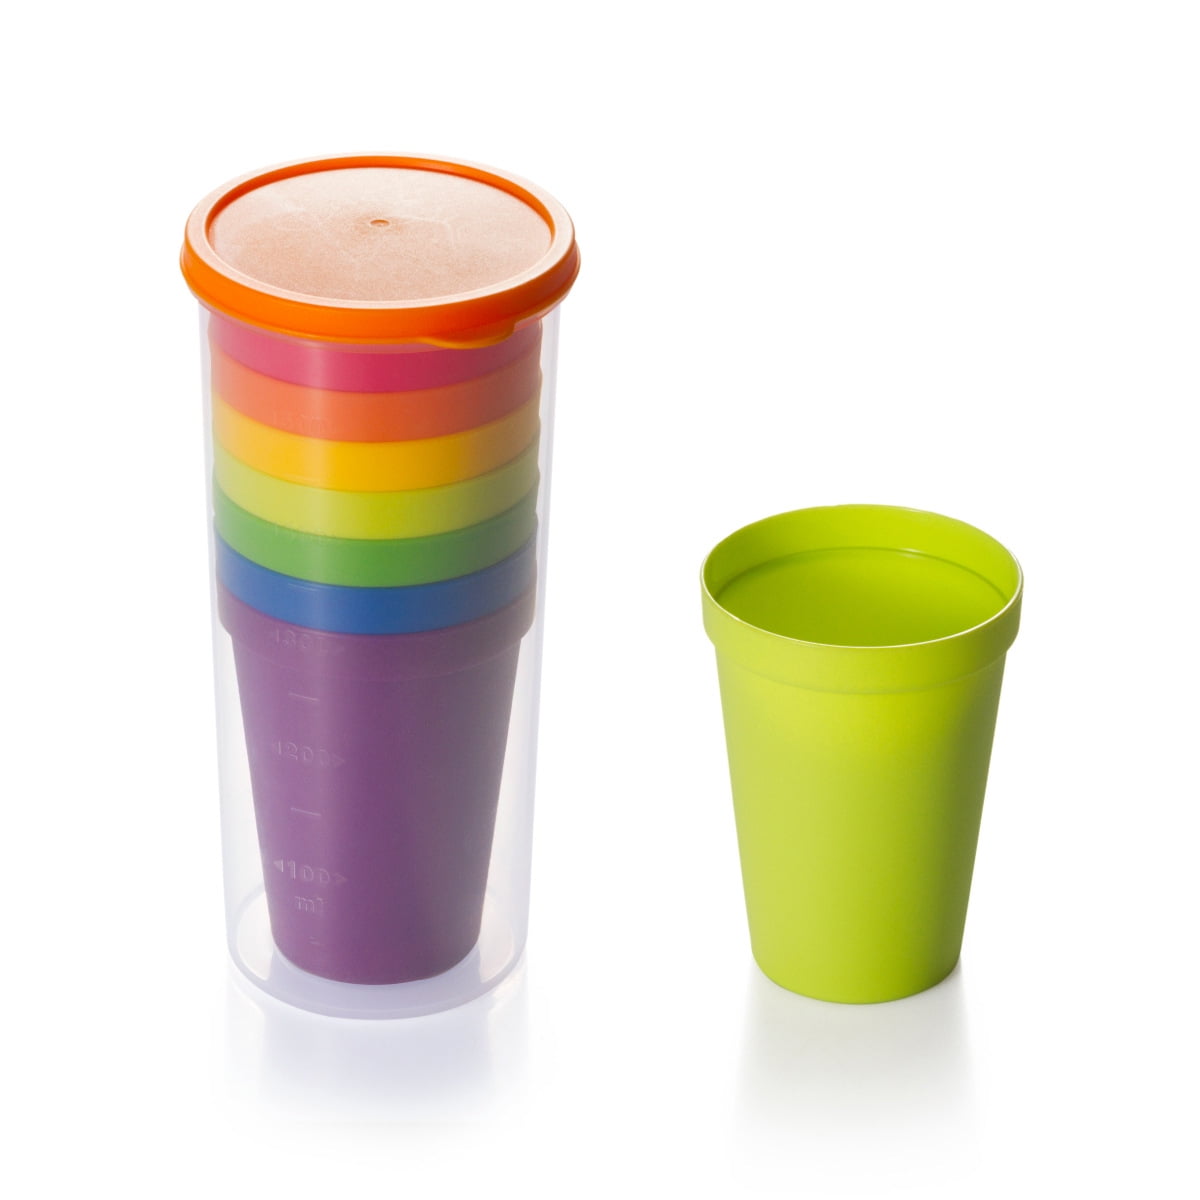  Eccliy Toddler Cups Kids Cups 8 oz Plastic Cups Reusable Cups  Unbreakable Plastic Drinking Cups Tumblers for Kids Baby Toddlers,  Dishwasher Safe, 6 Colors (36 Pcs) : Toys & Games